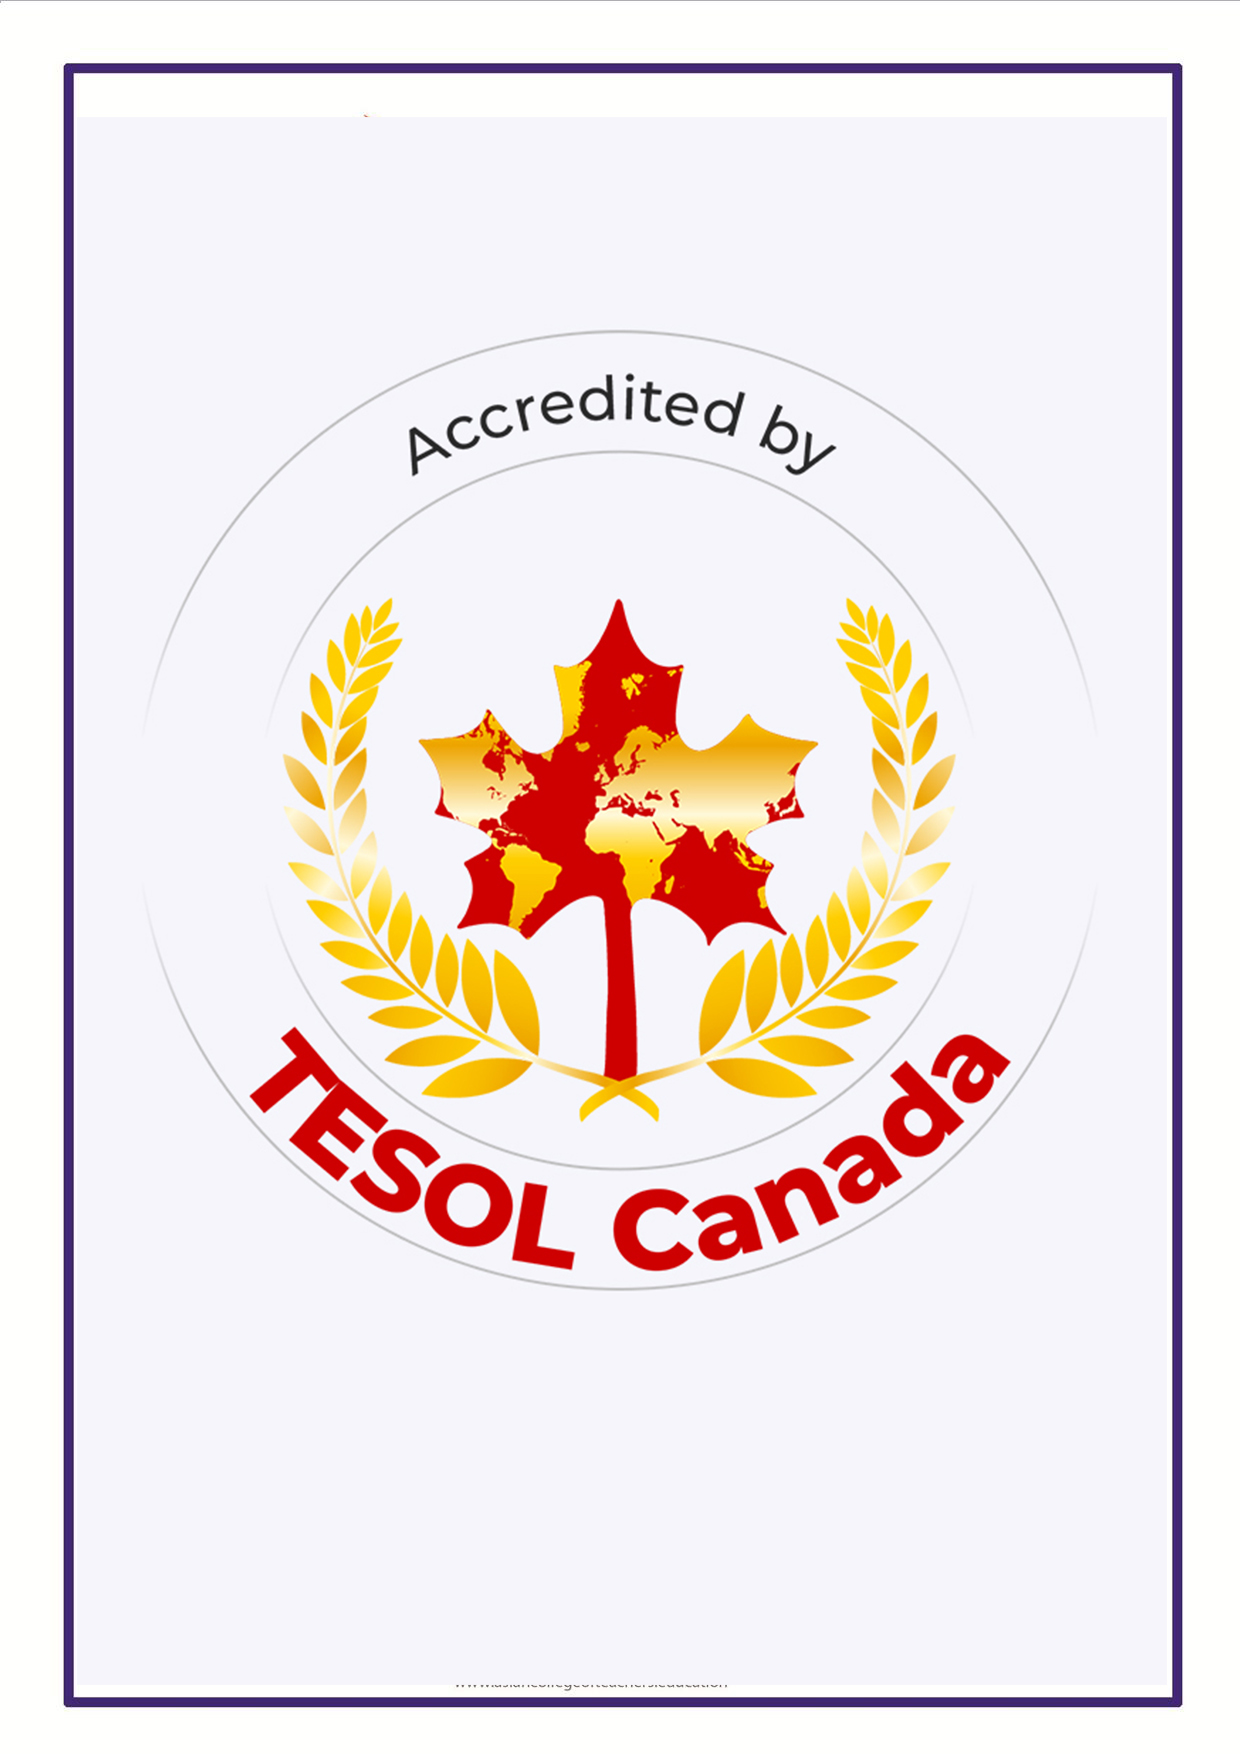 ACT Accredited by TESOL Canada